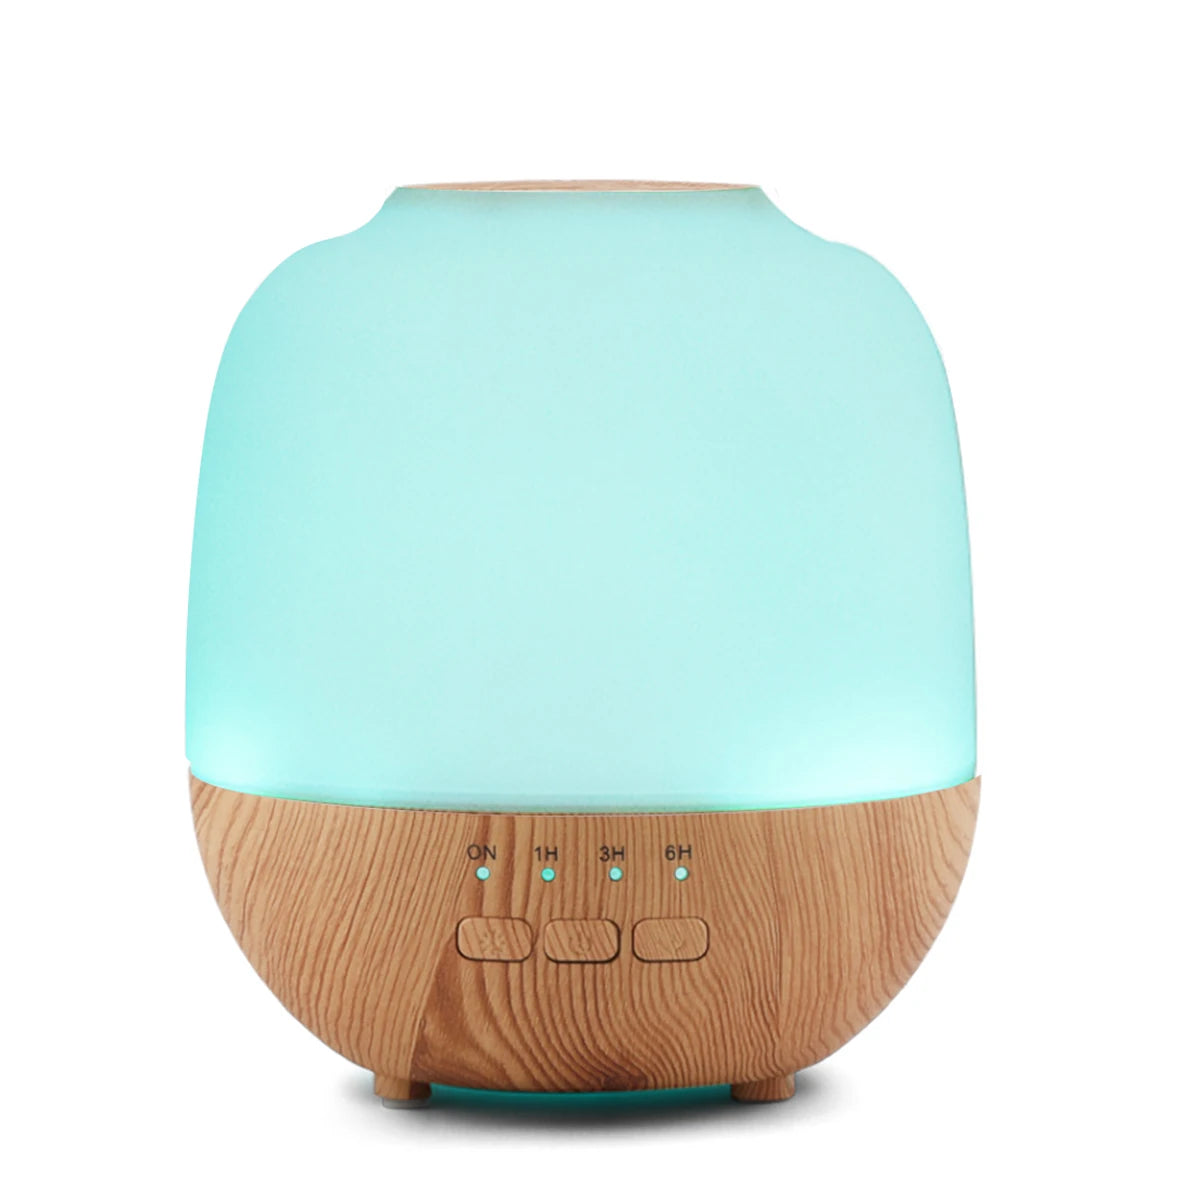 Wood Grain Air Humidifier Essential Oil Diffuser 120ML With Lights Ultrasound Electric Aromatherapy Diffuser